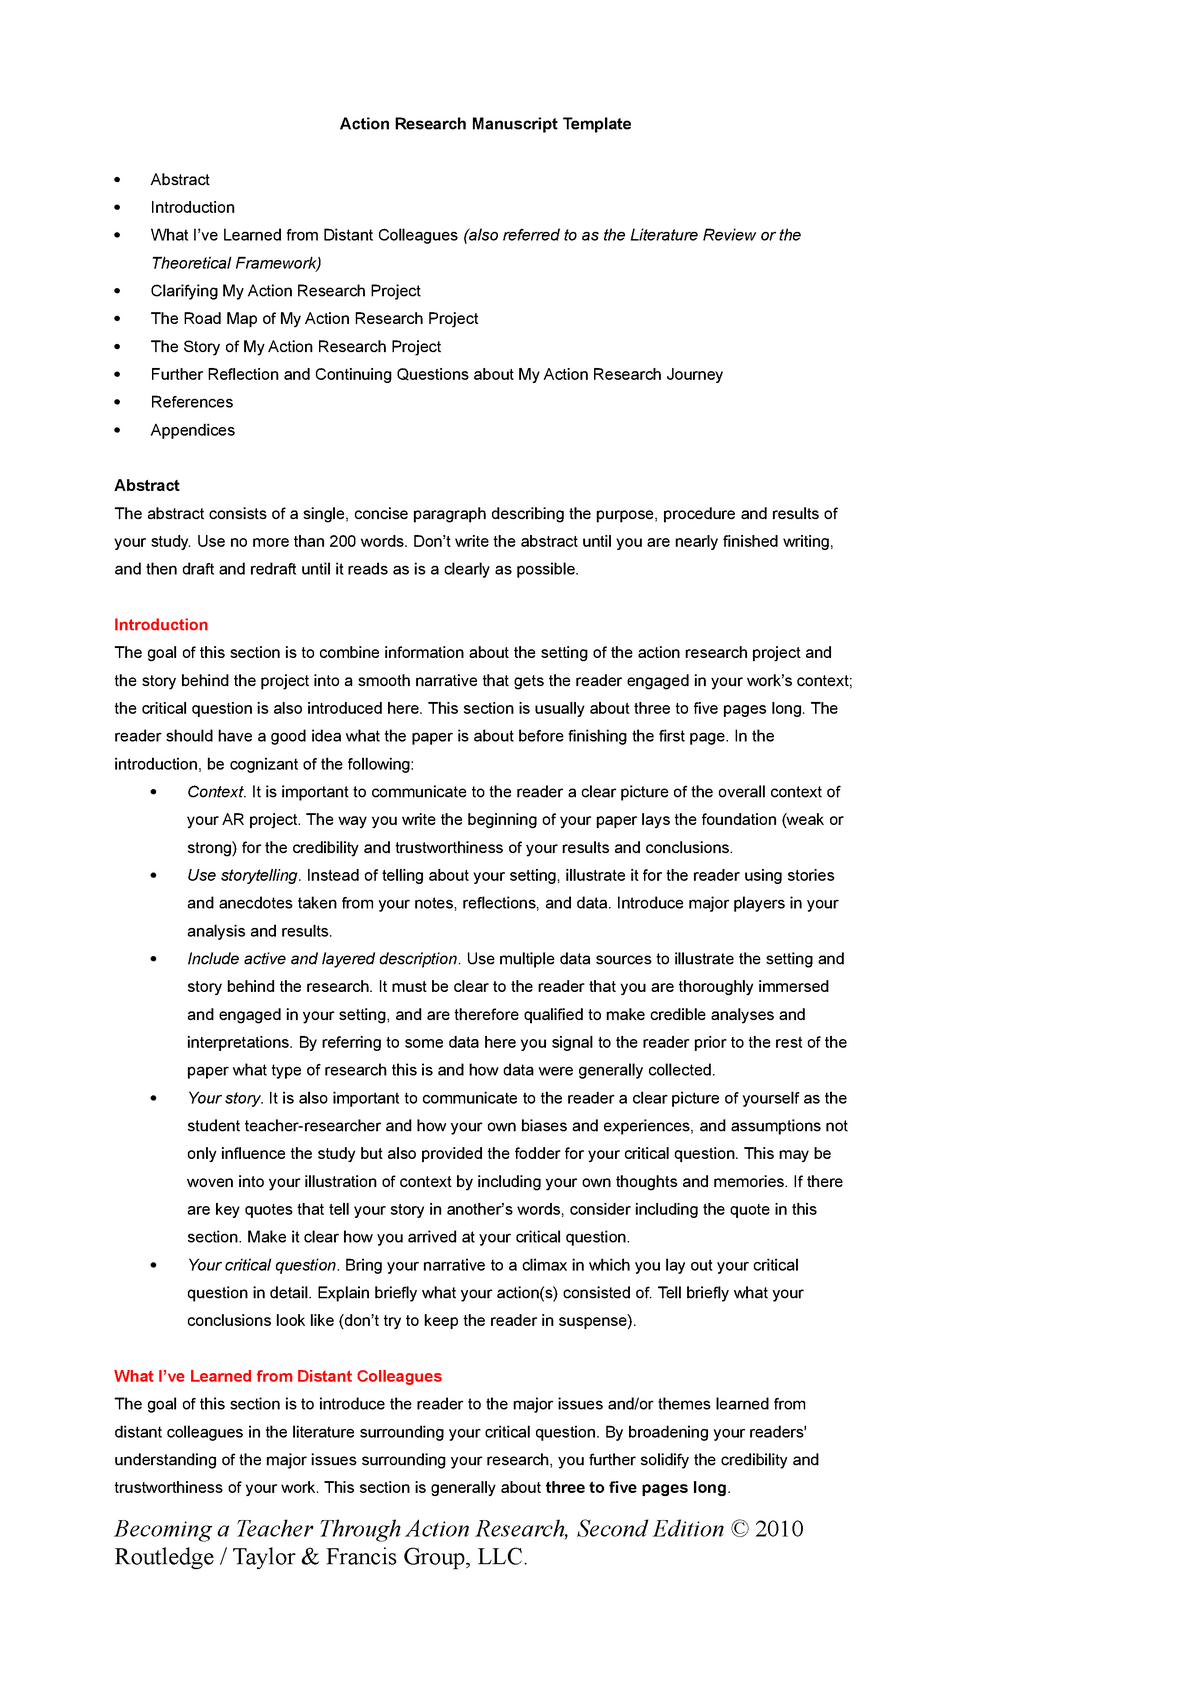 Action Research Paper Outline Template Word Doc - StuDocu